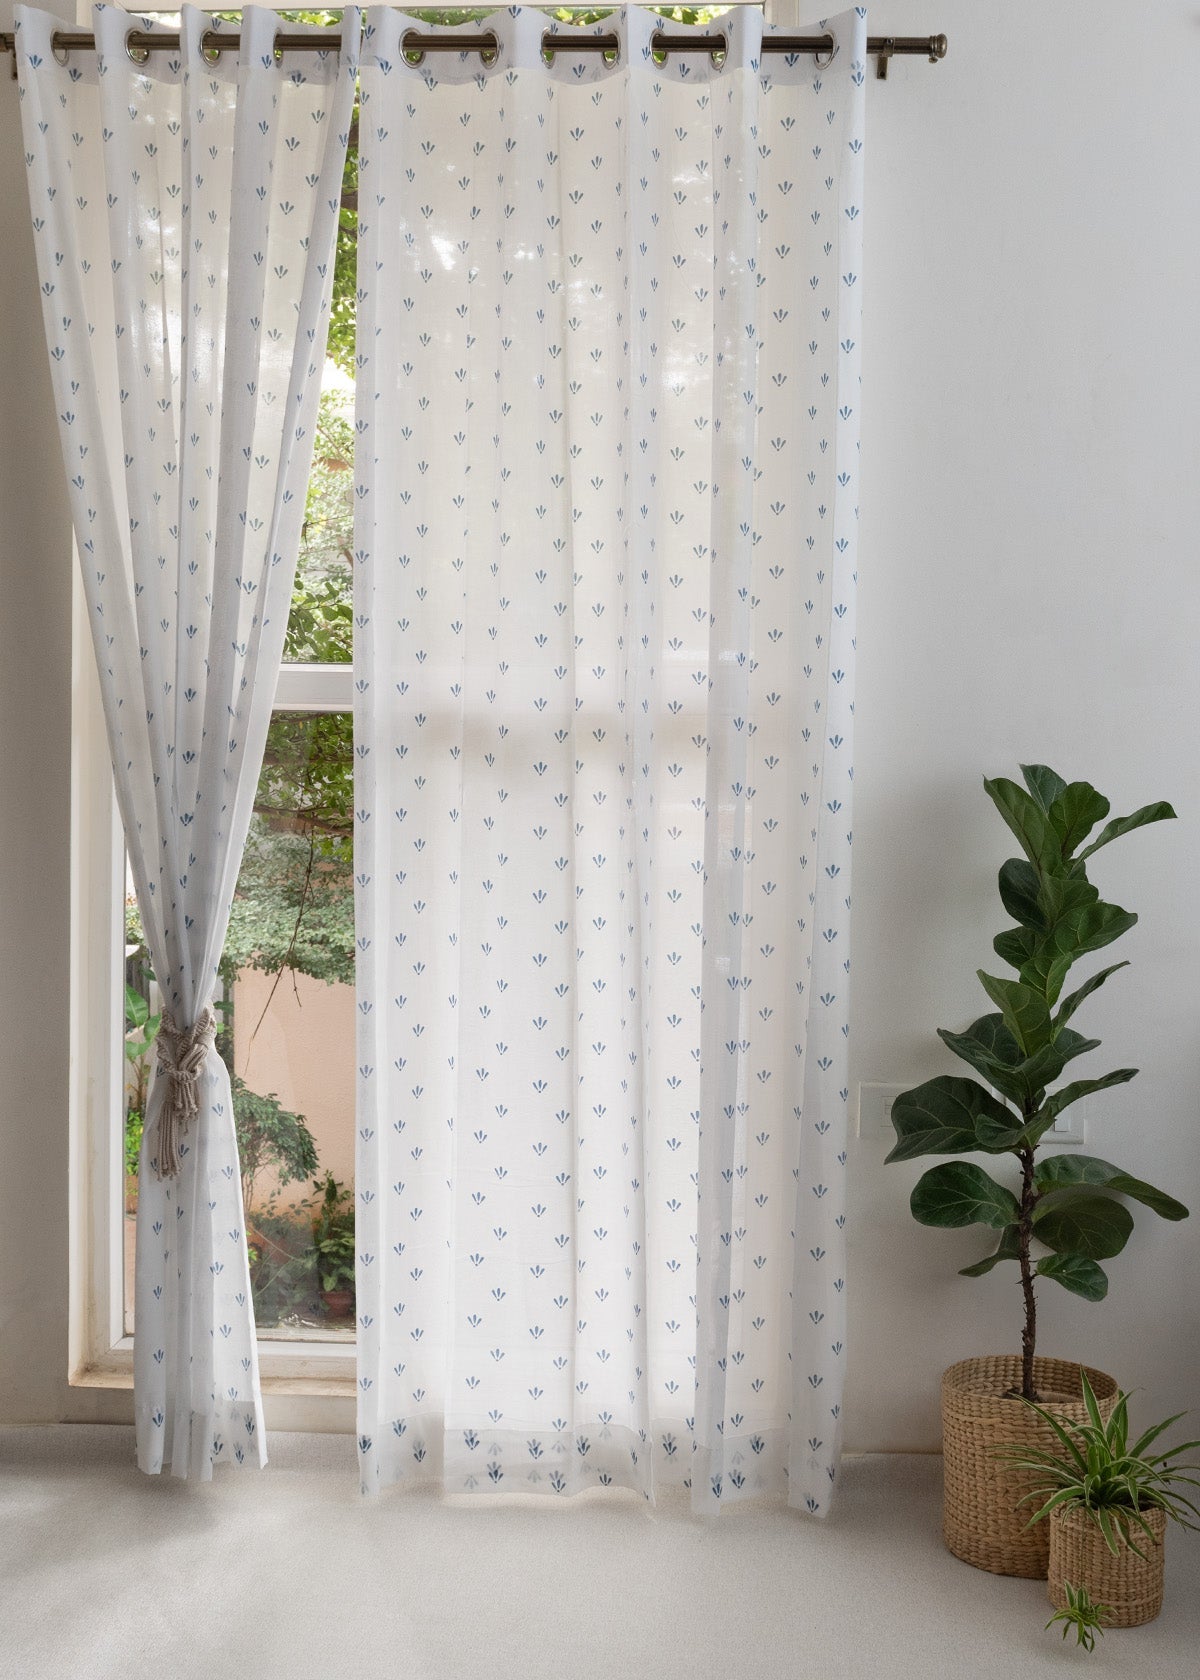 Aniseed 100% cotton floral sheer curtain for living room - Light filtering - Indigo - Pack of 1